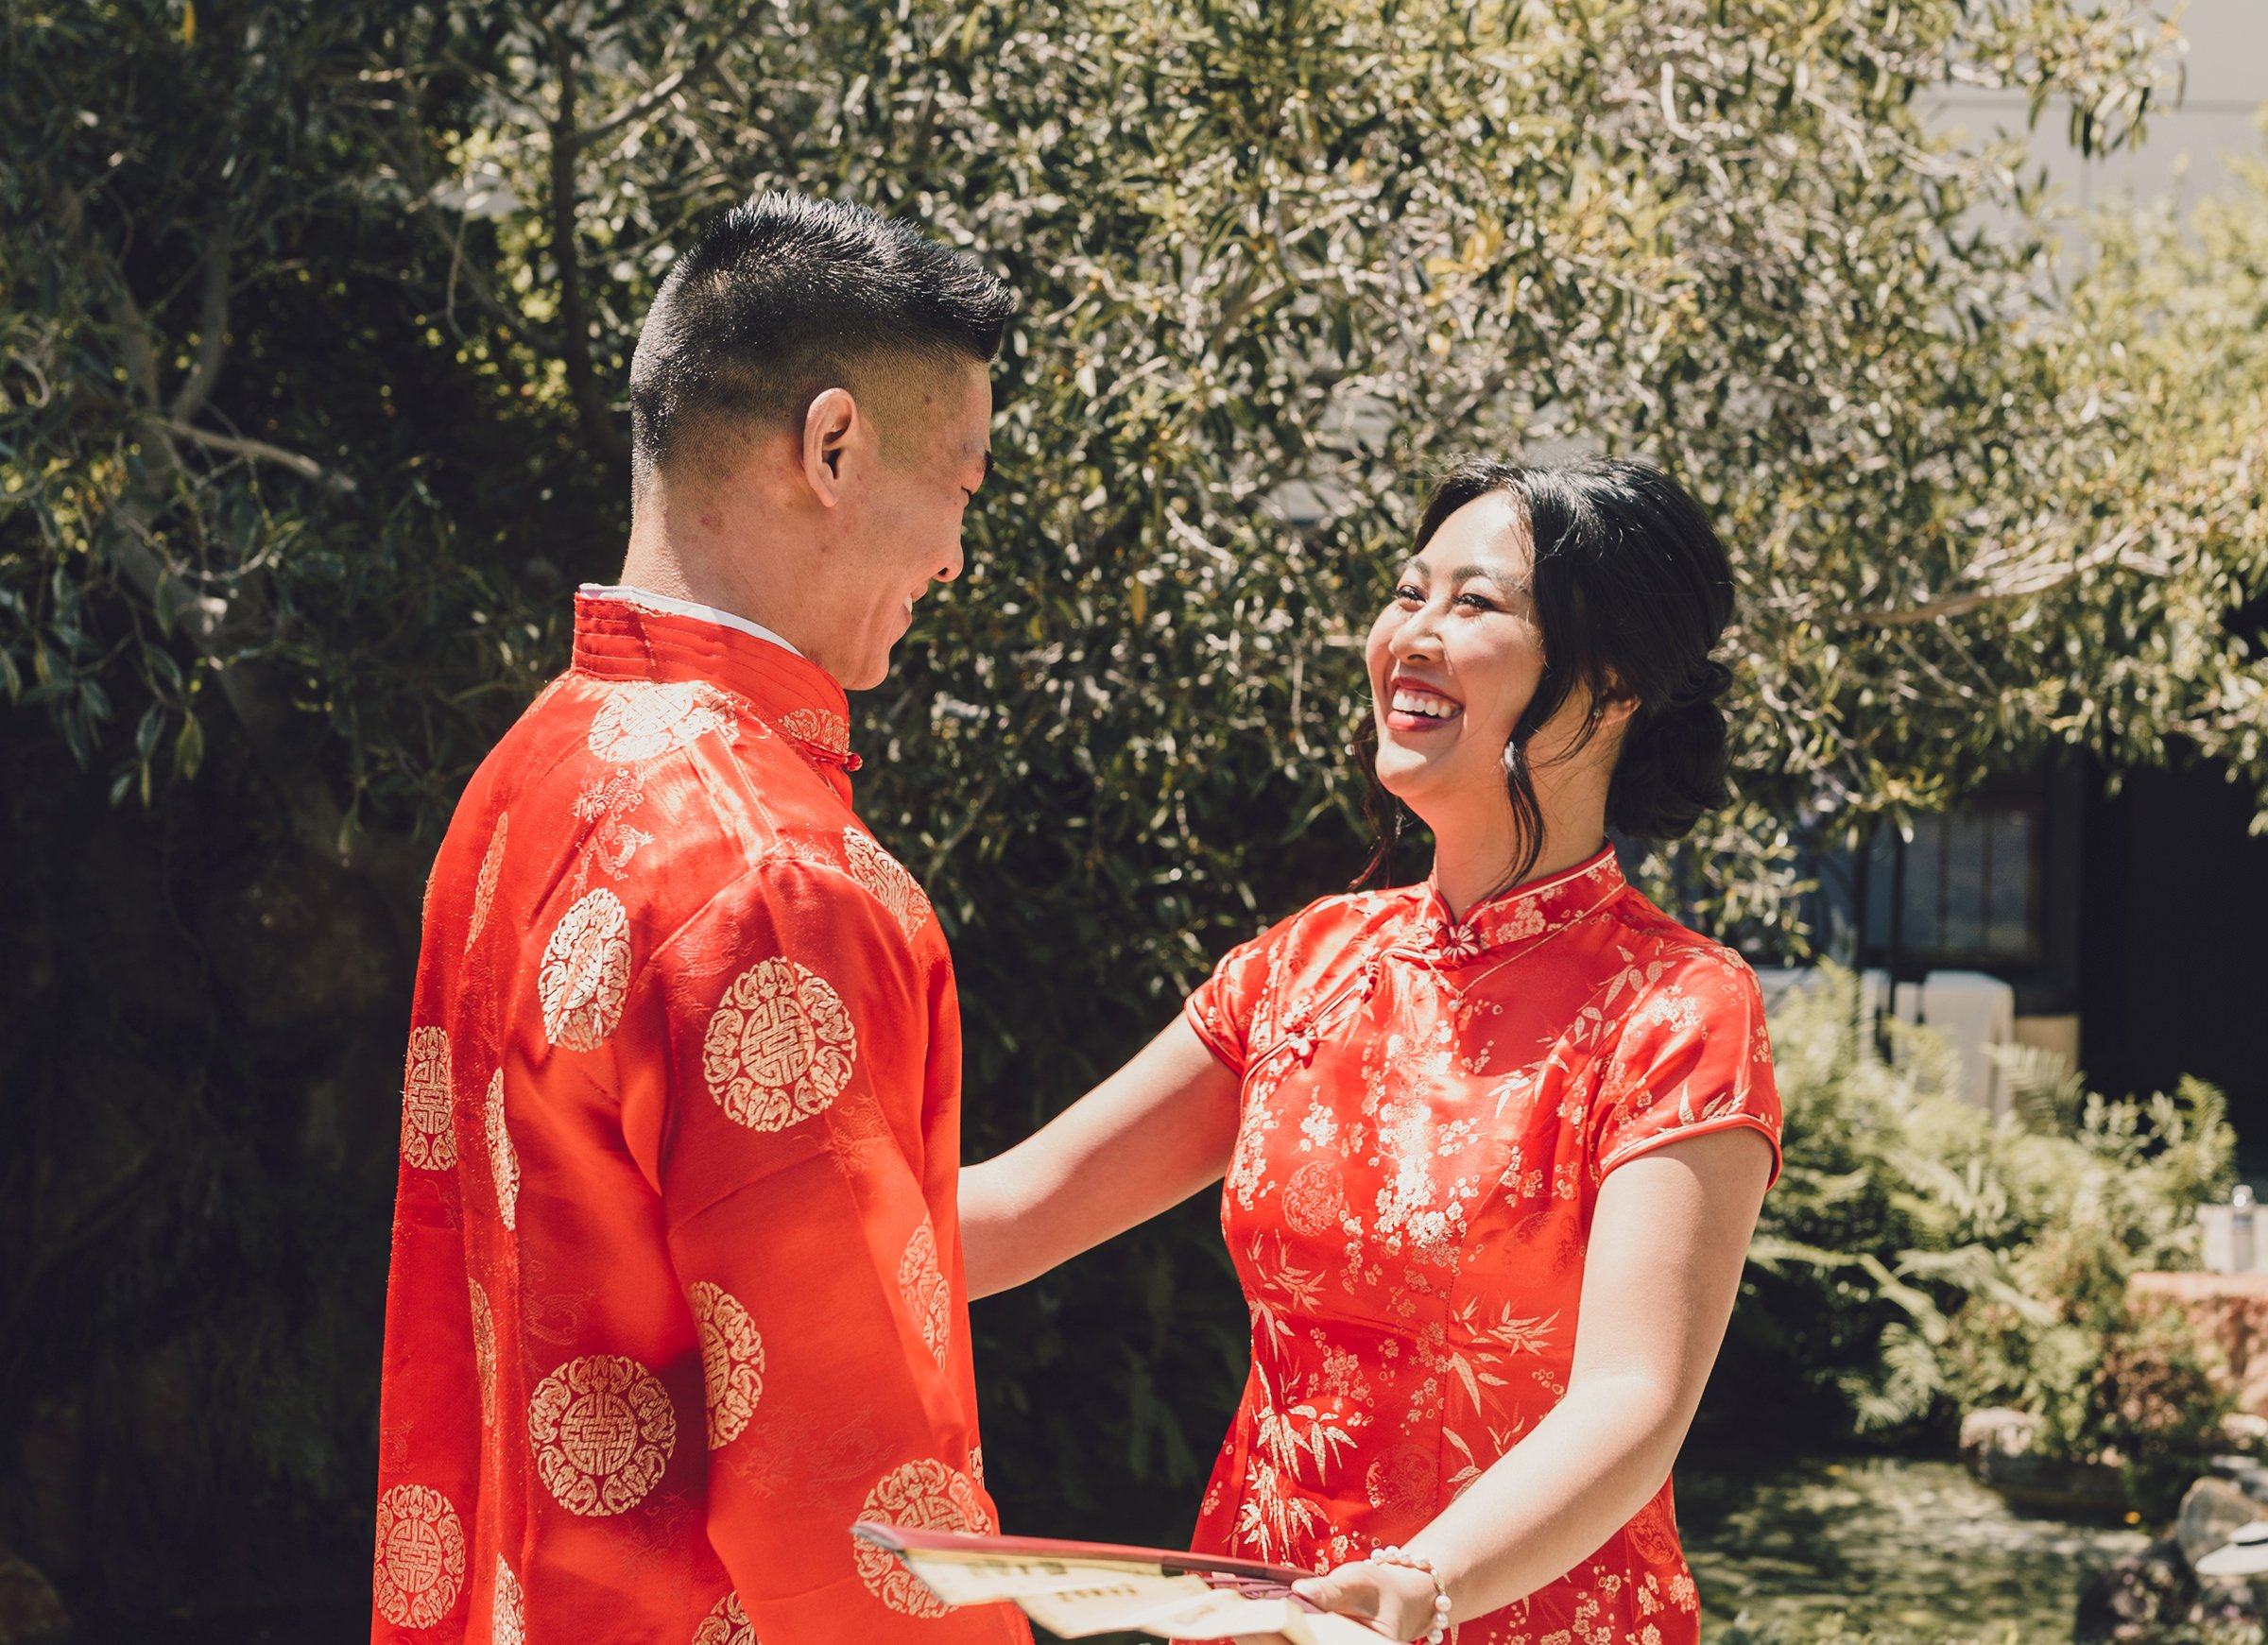 modern-asian-american-wedding-first-look-traditional-chinese-attire-socal-photographer-9.jpg